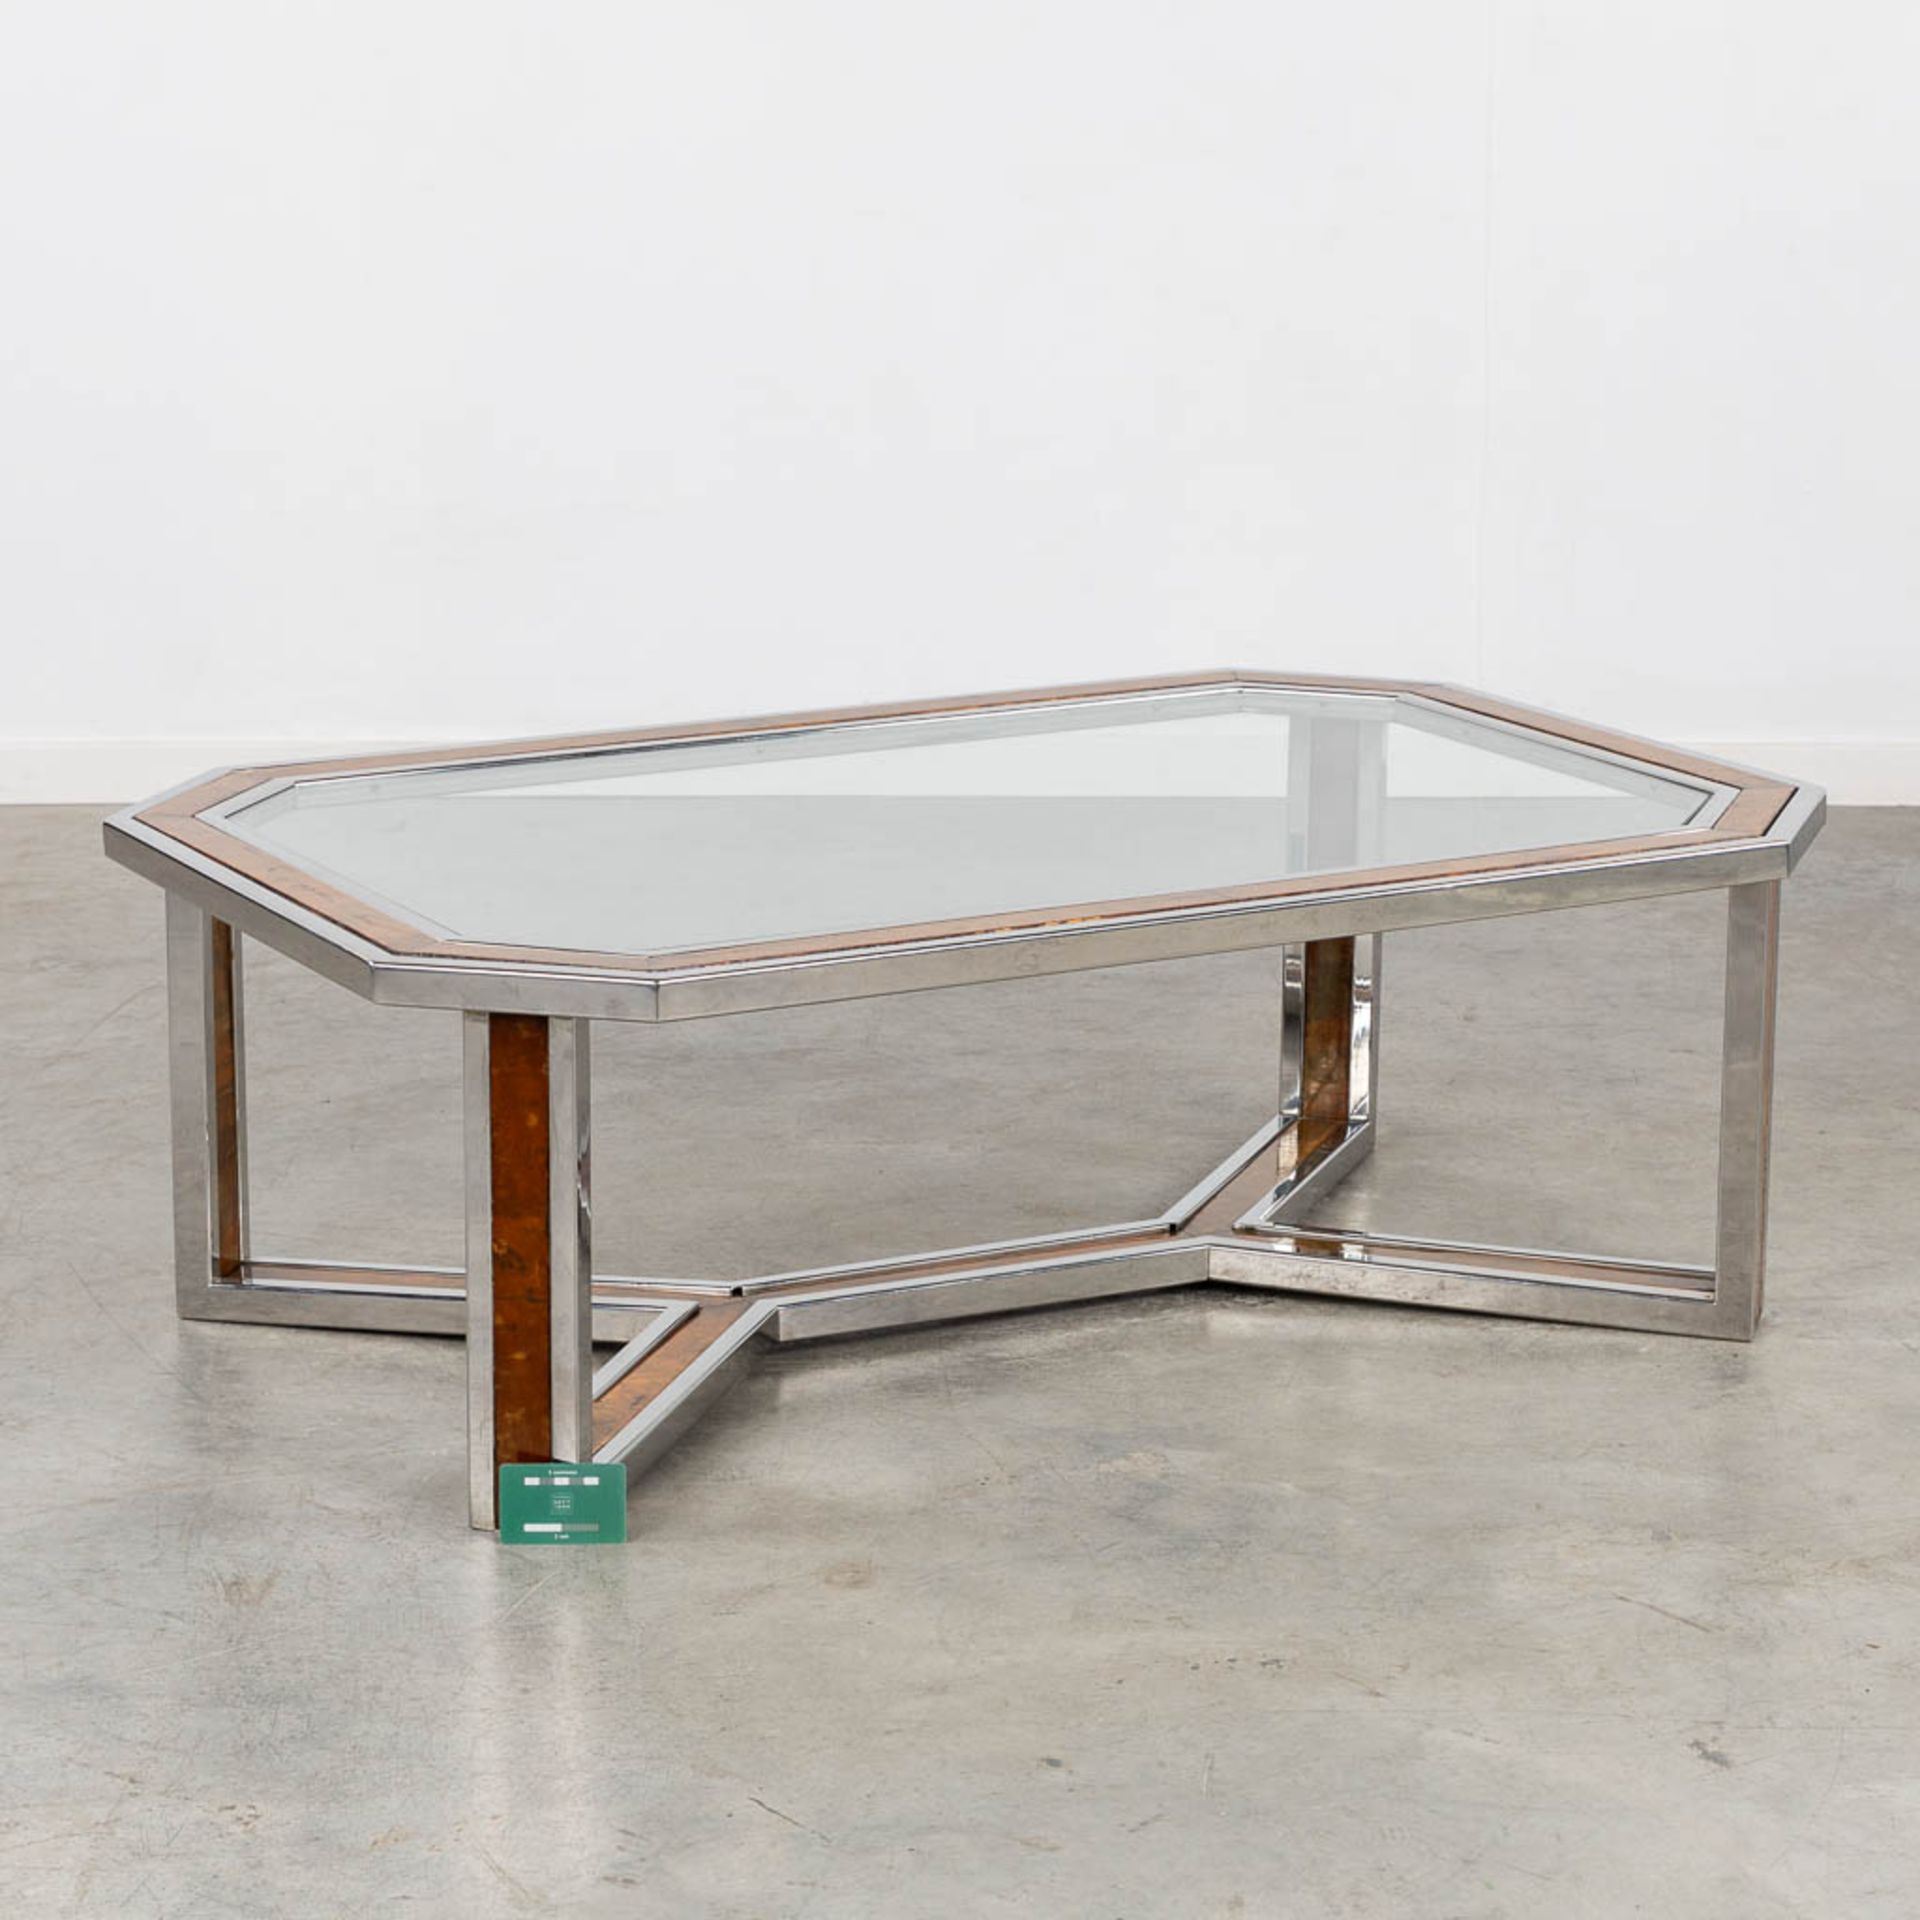 A coffee table, chrome with a faux wood inlay and a glass top. (L:80 x W:120 x H:40 cm) - Bild 2 aus 10